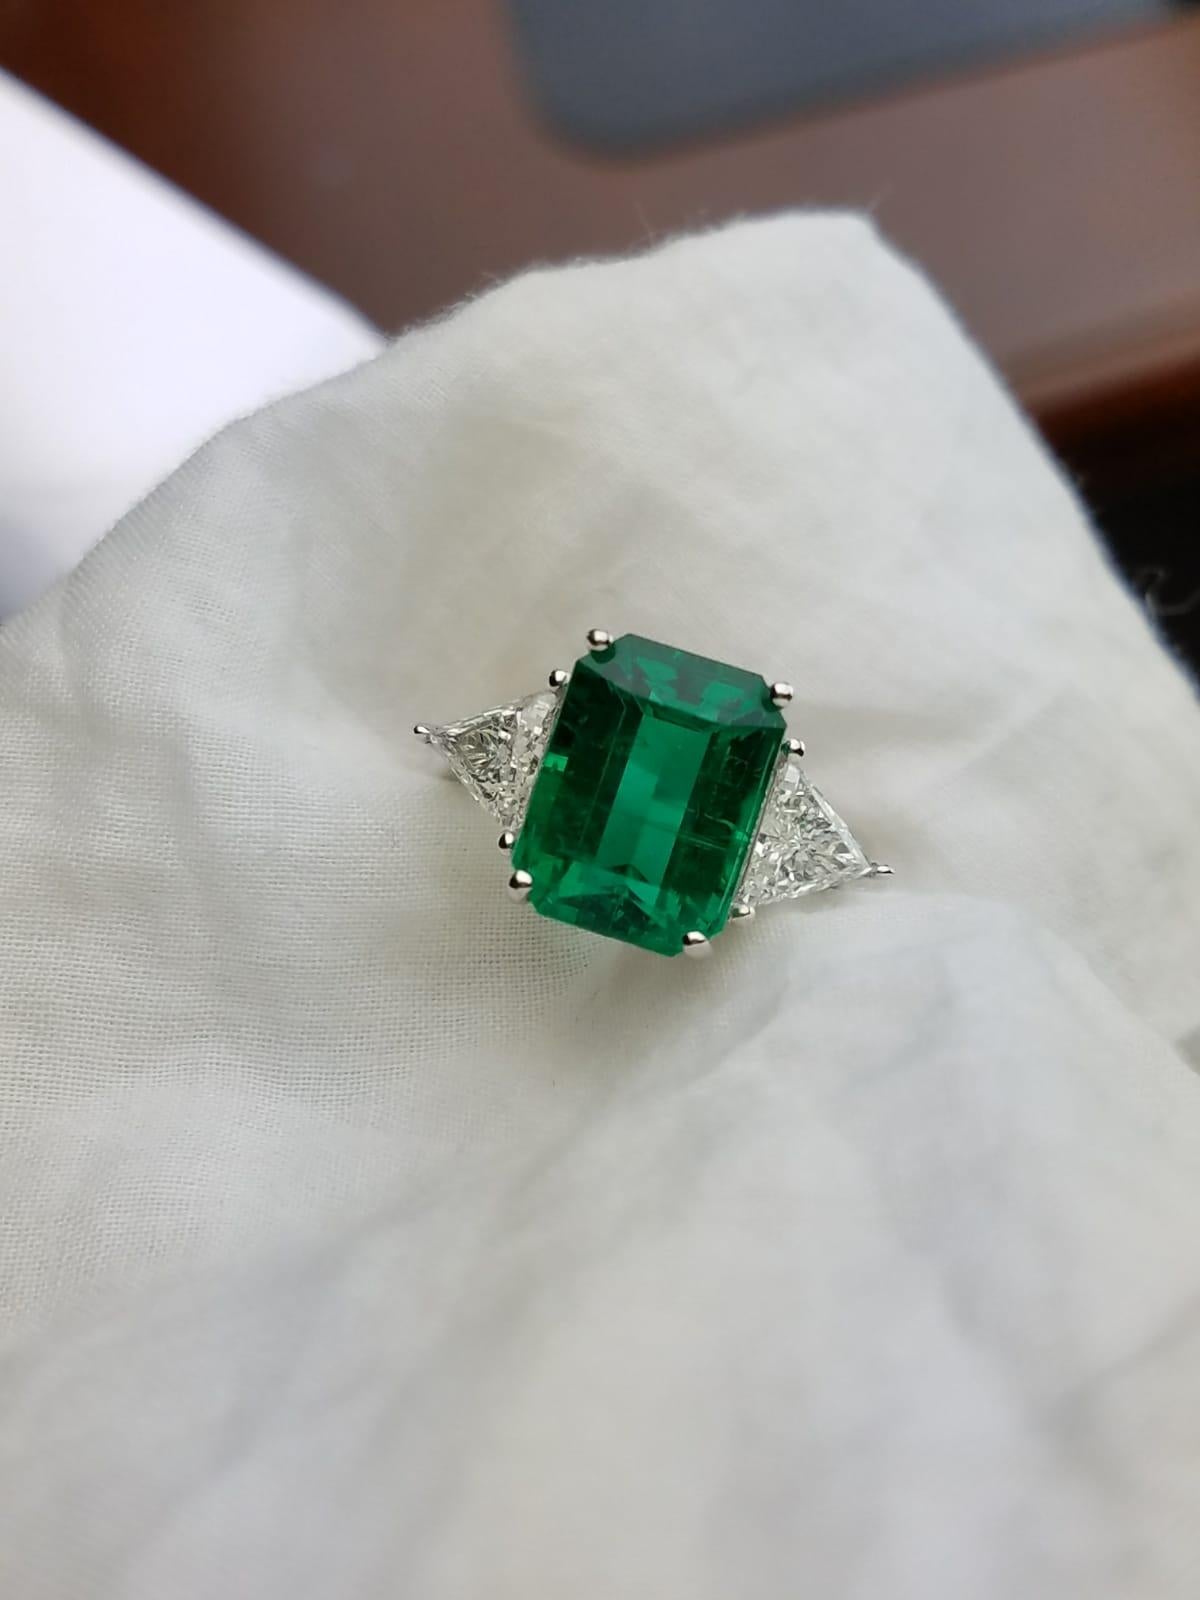 A classic three stone ring, with a 5.82 carat high quality and great colour emerald cut Zambian Emerald centre stone and 2 trapeze 0.83 carat side stone Diamonds. 

Stone Details: 
Stone: Emerald
Carat Weight: 5.82 Carats

Diamond Details: 
Total